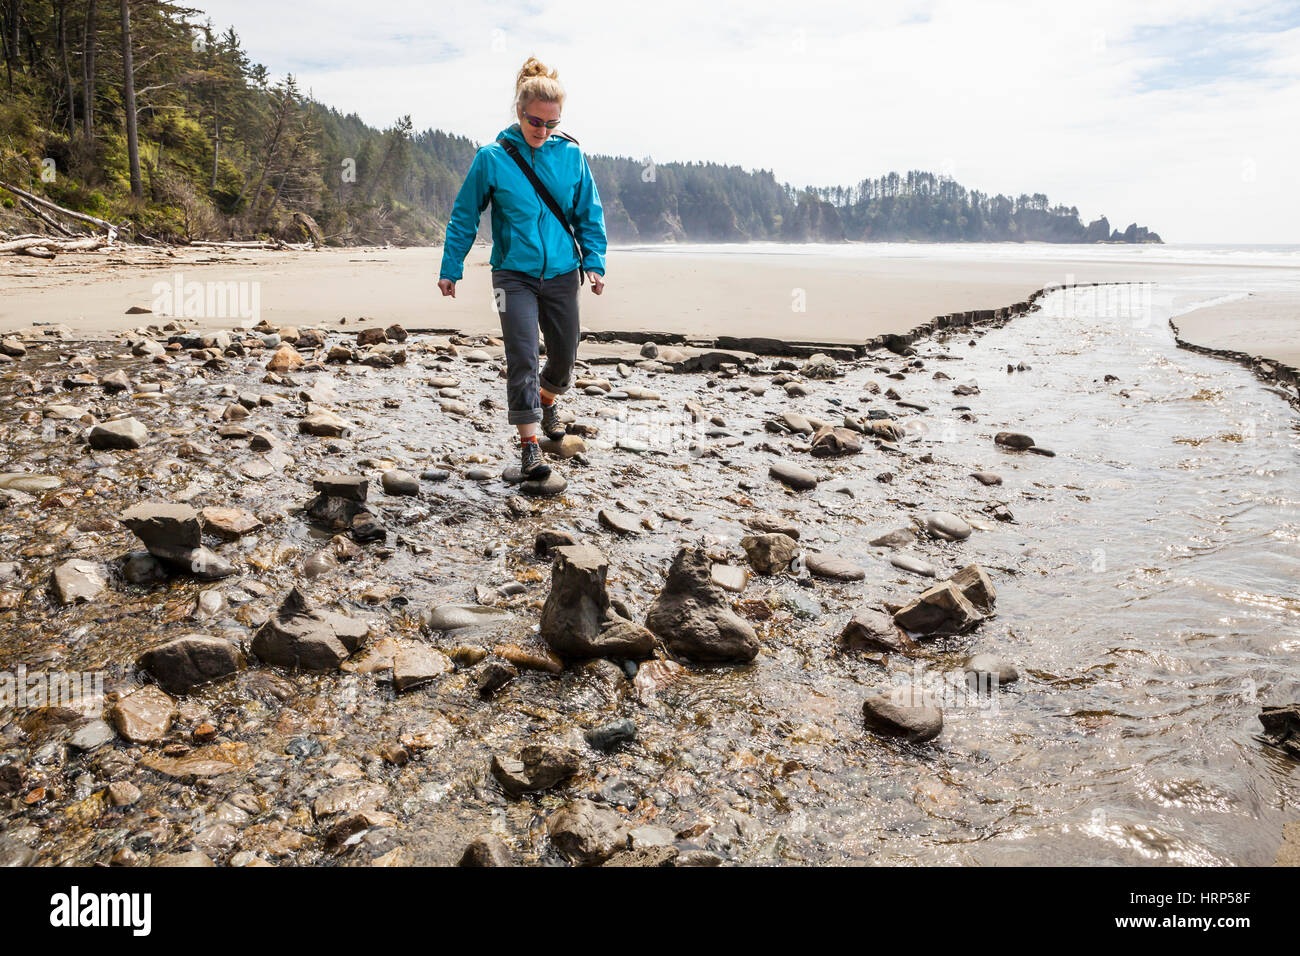 A woman hopping from rock to rock across a stream on 2nd Beach, Olympic National Park, Washington, USA. Stock Photo